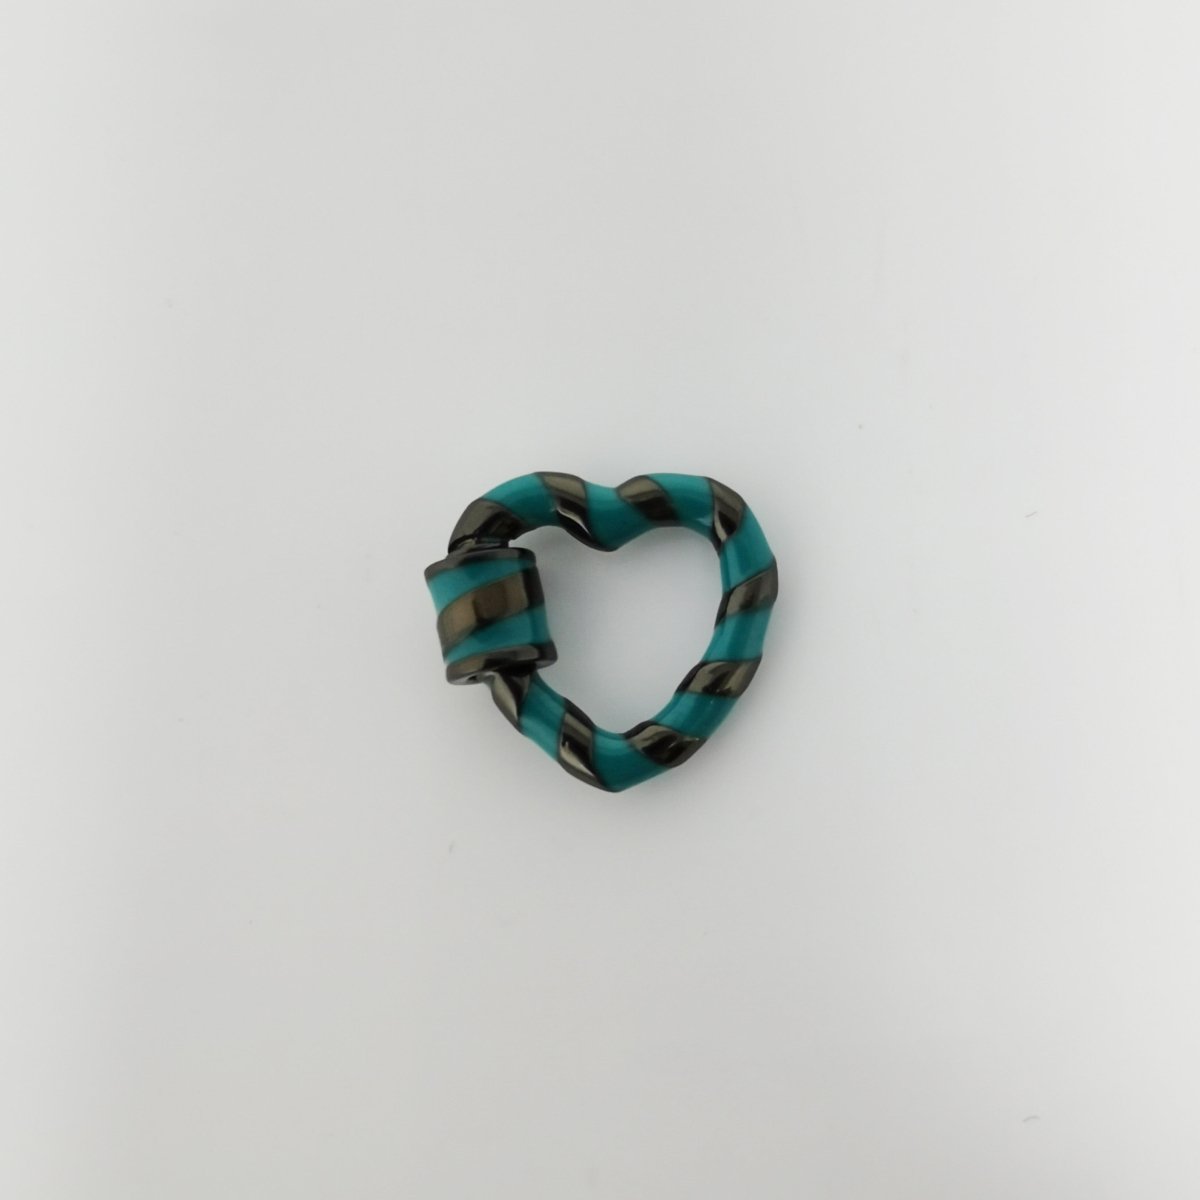 Blue and Black Heart Carabiner, Candy Cane Swirl Design, Circle Screw Clasp - DLUXCA